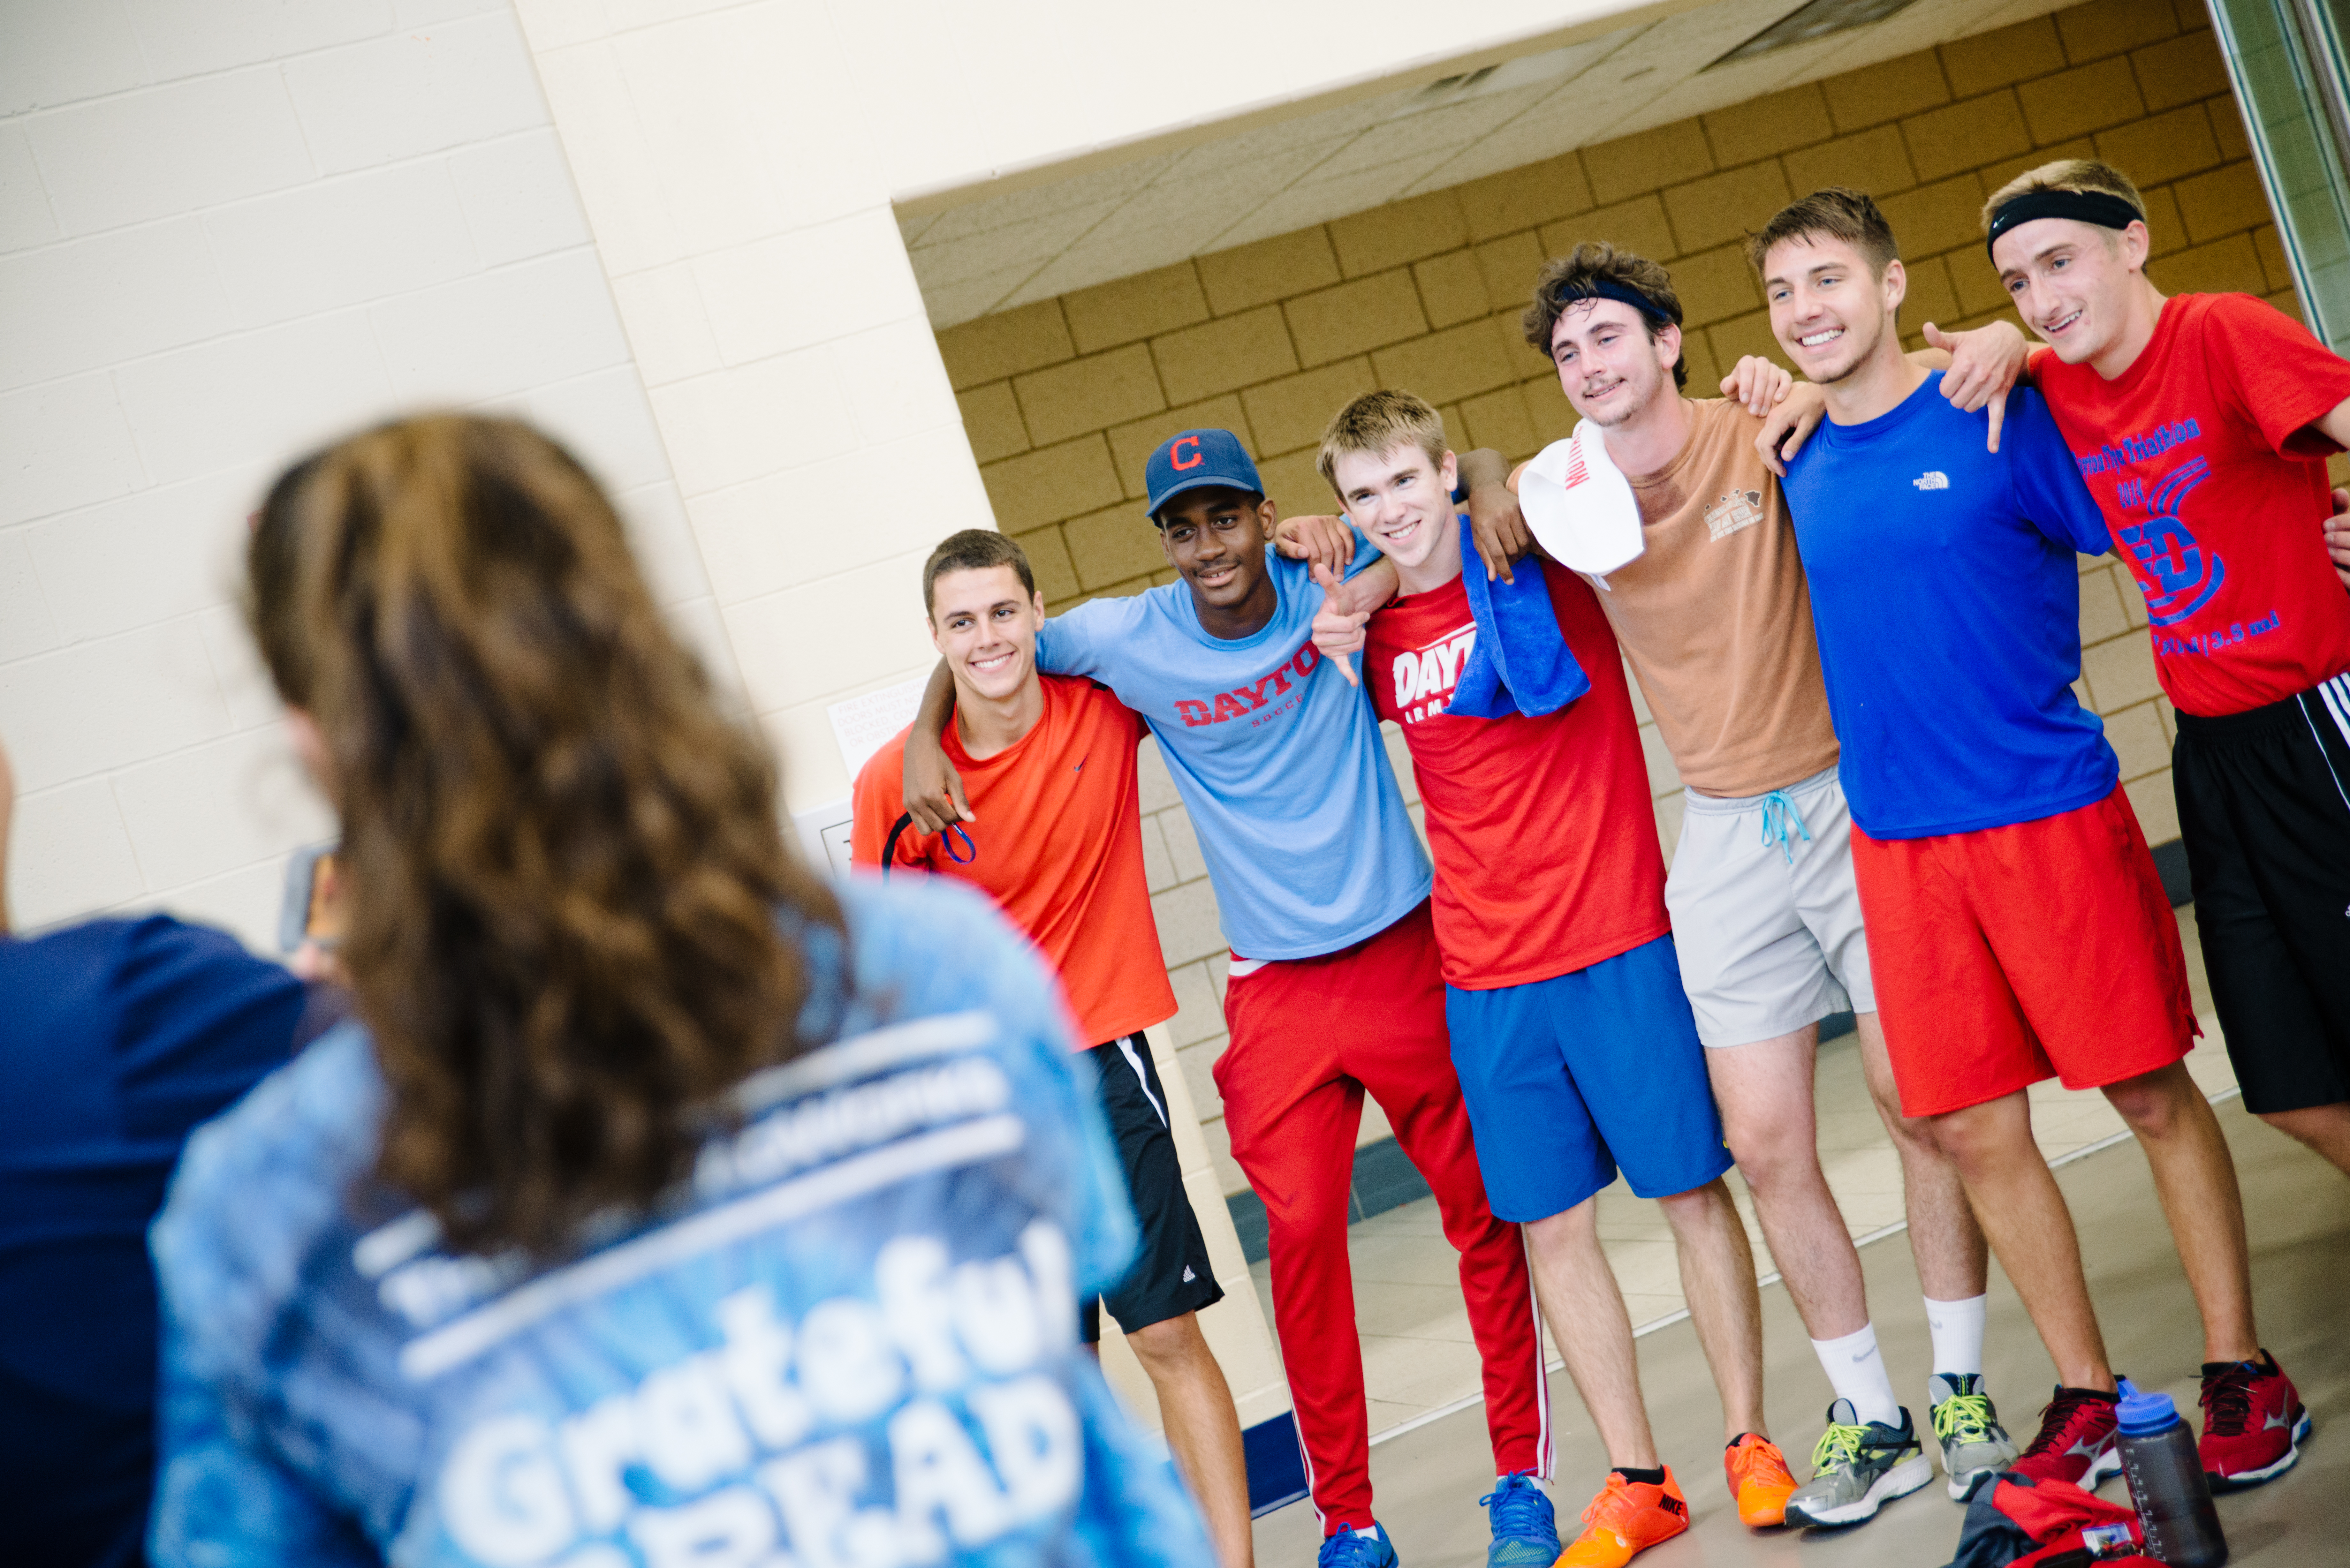 Group of students in UD gear smiling during an intramural competition